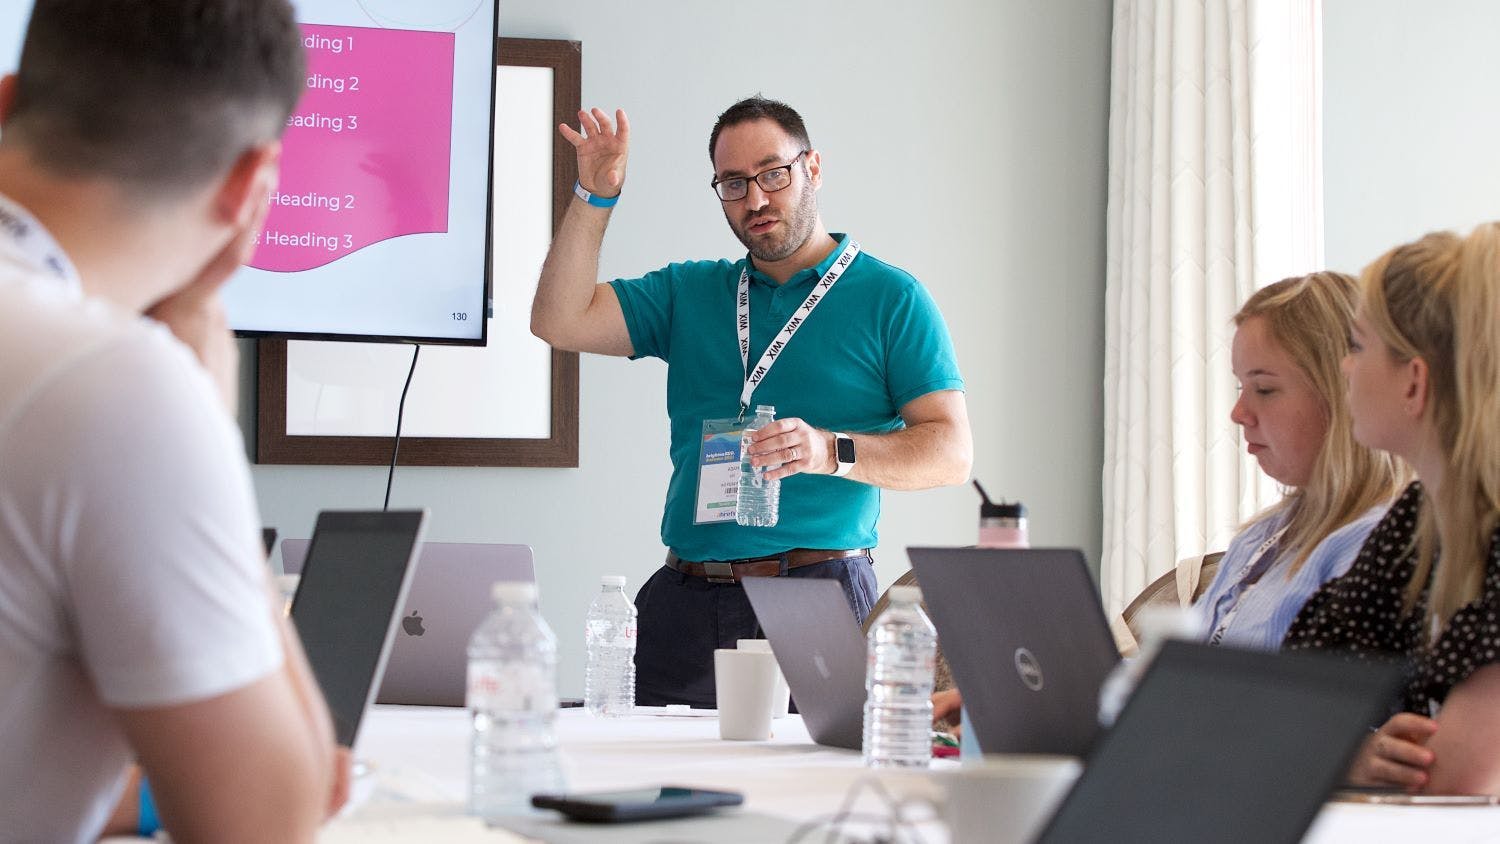 brightonSEO trainer leading a workshop